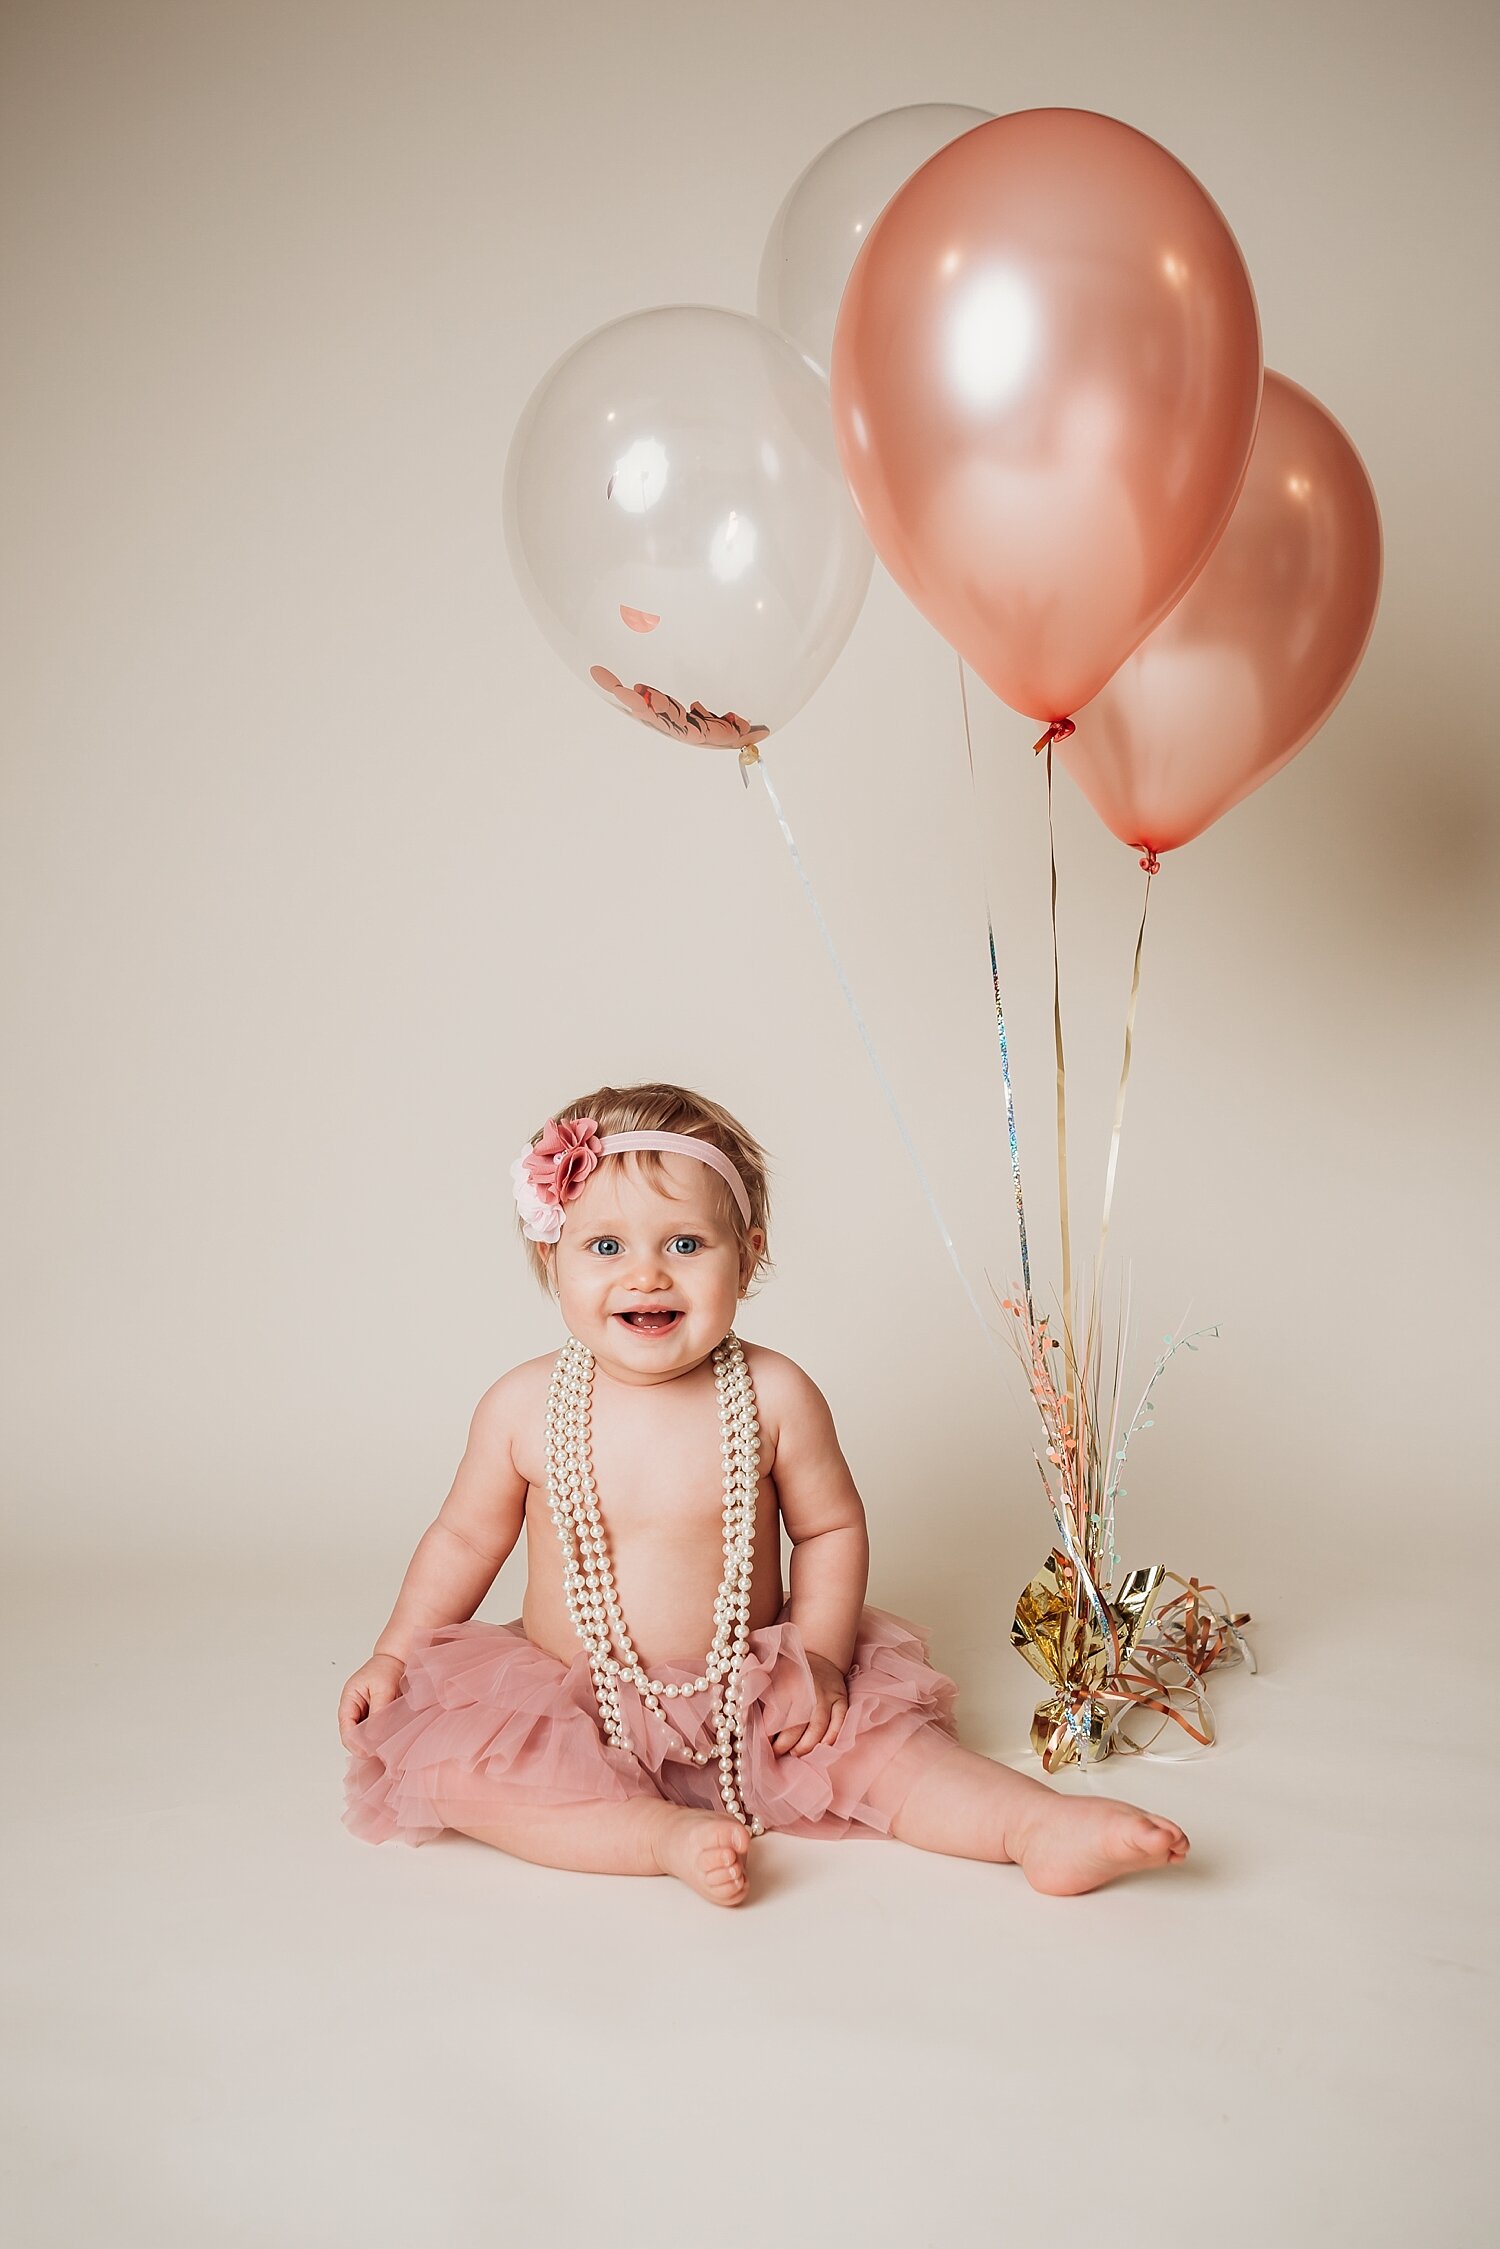 Cake smash babies - how will my baby react? - Picture You Photography